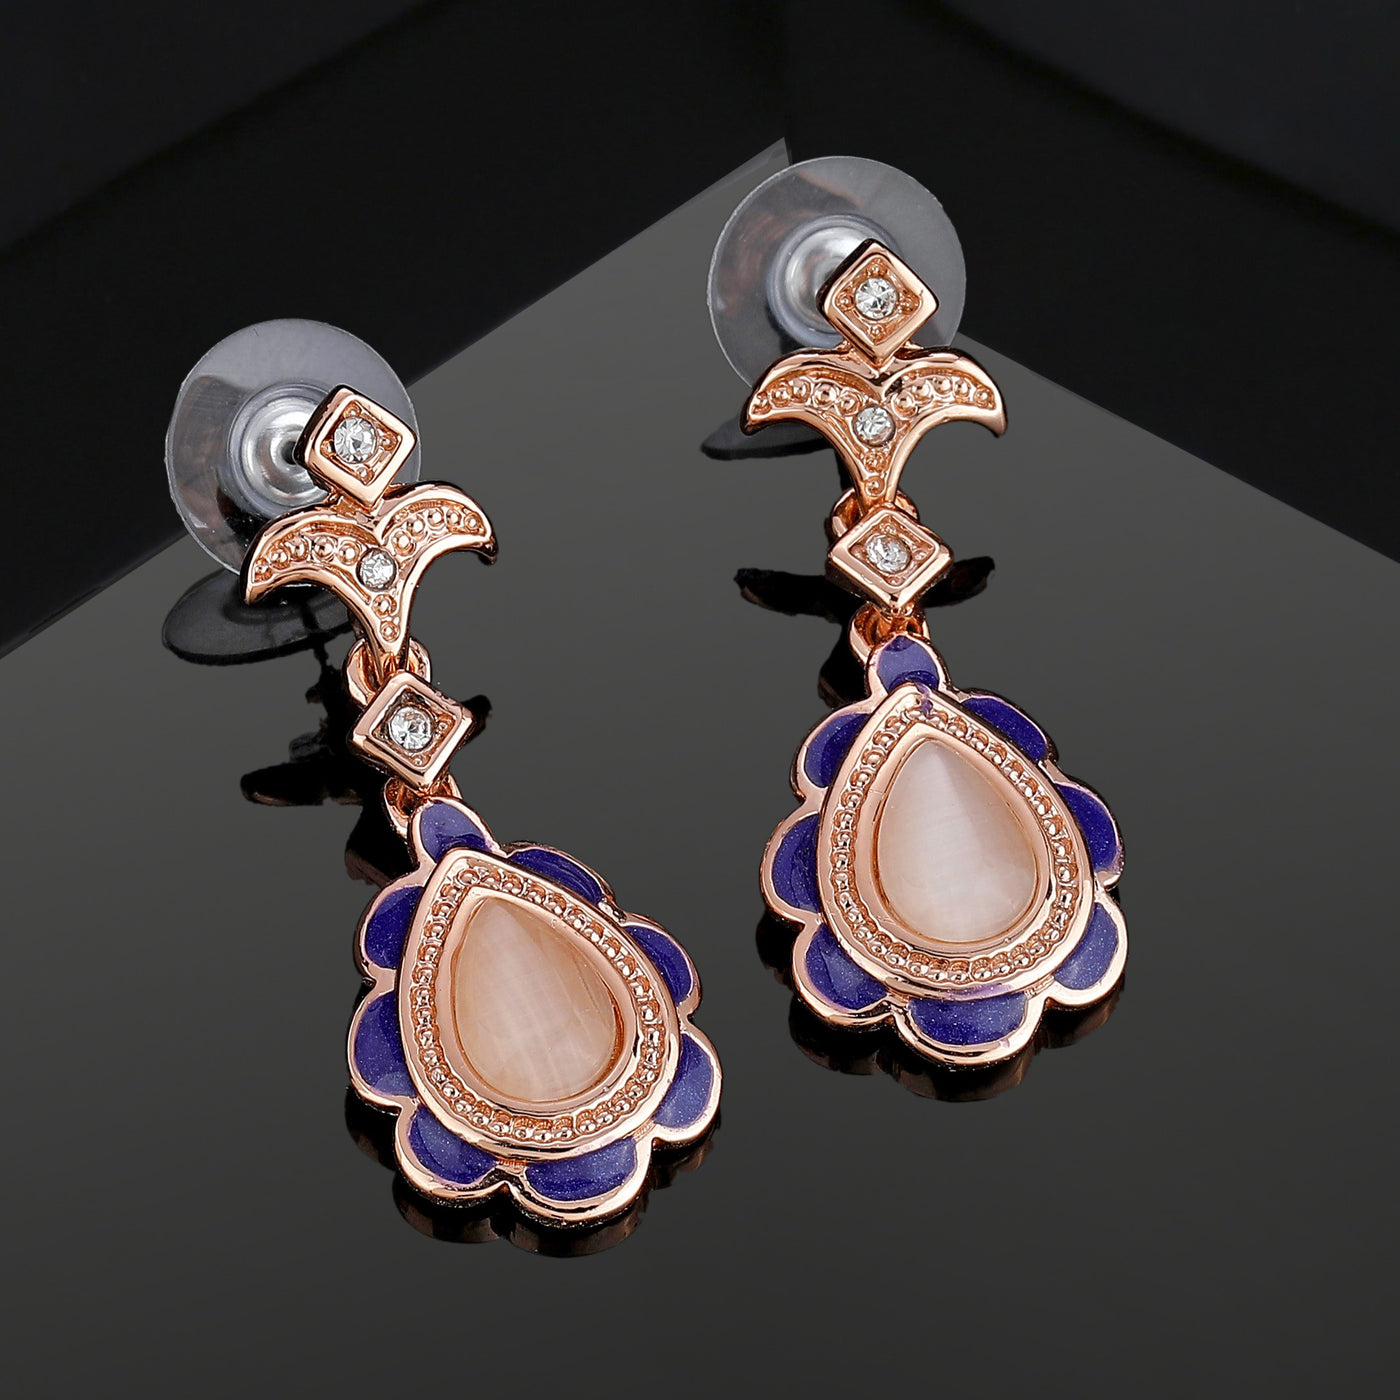 Estele Rose Gold Plated Beautiful Drop Earrings with Austrian Crystals for Women